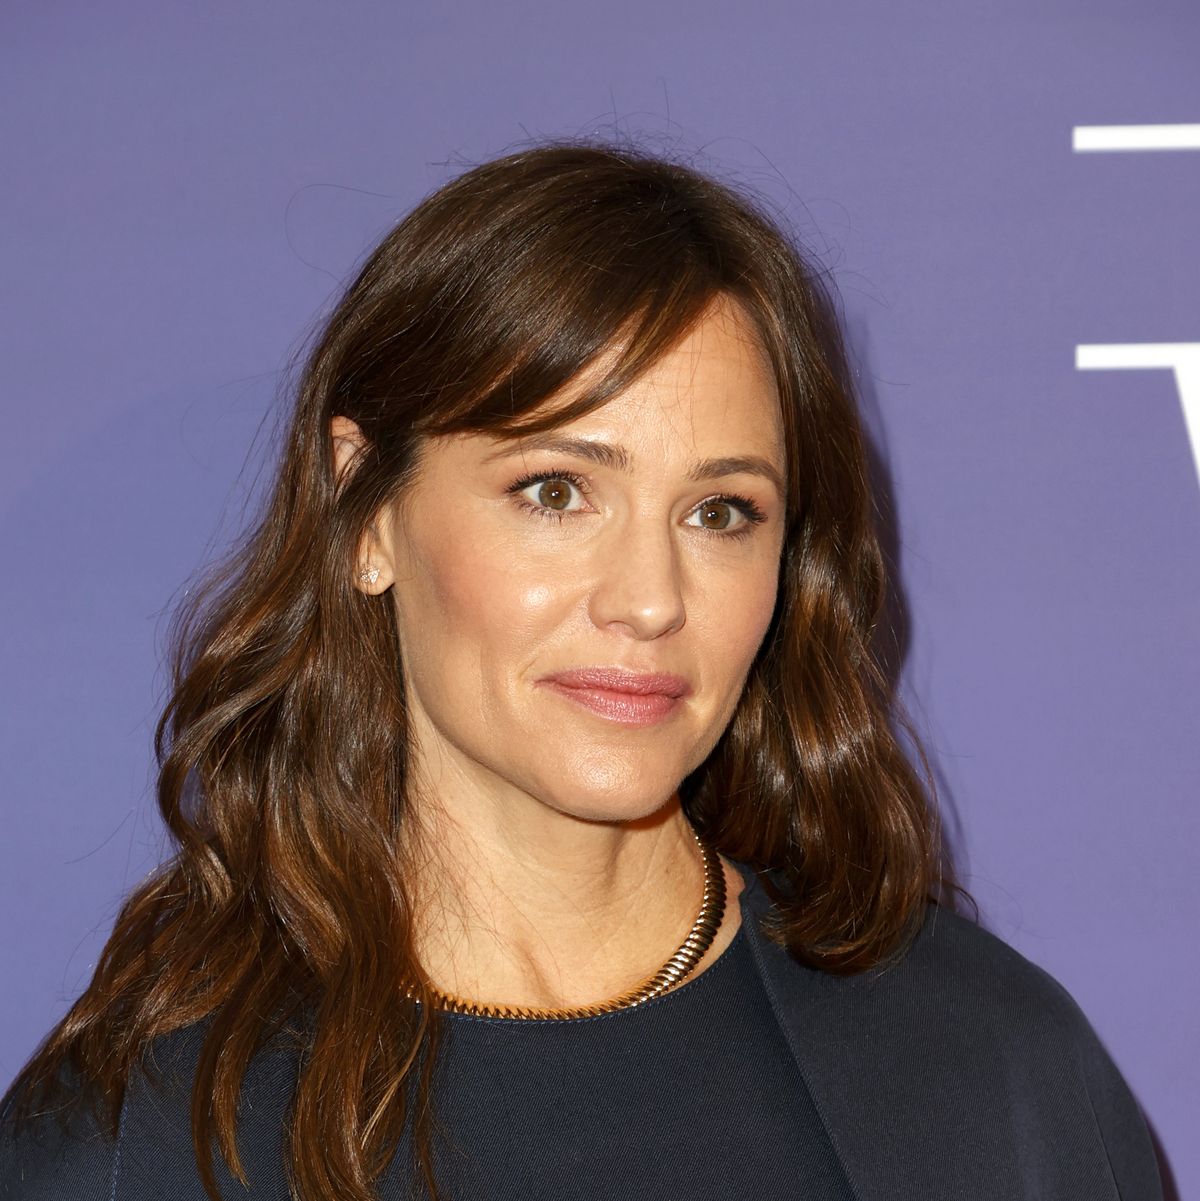 Jennifer Garner Shares Her Experience With Anxiety